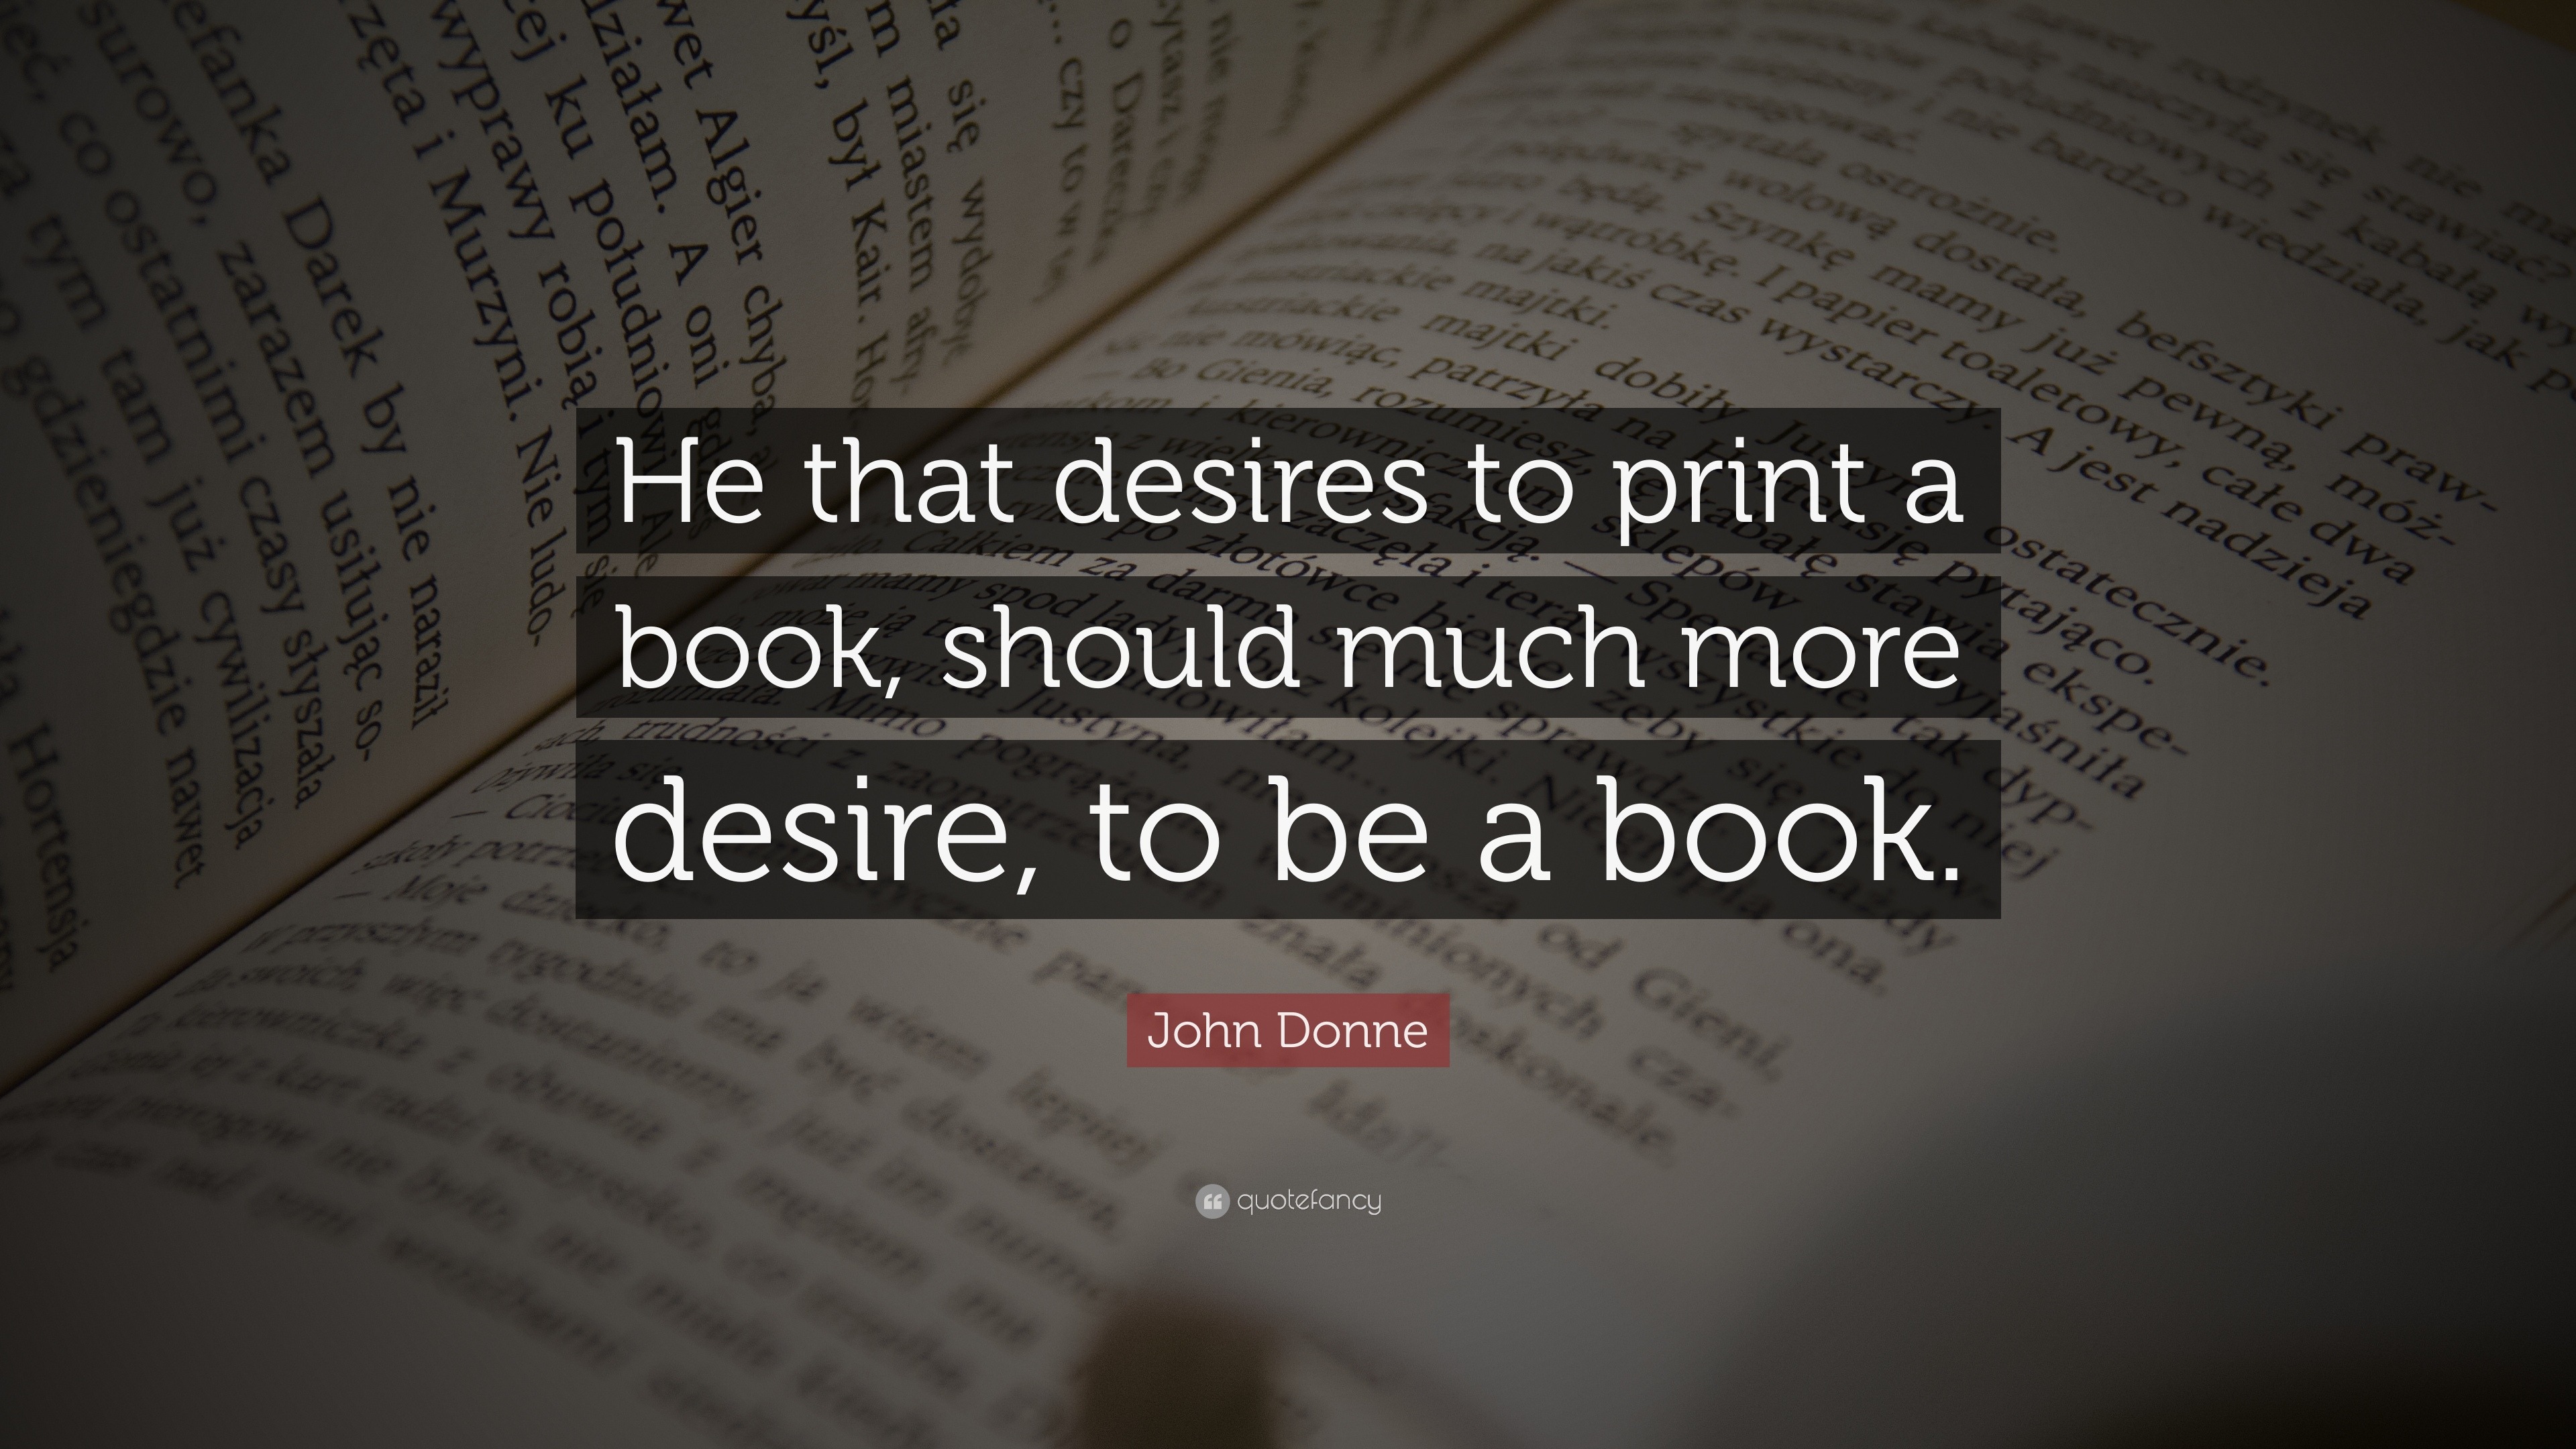 John Donne Quote: “He that desires to print a book, should much more ...